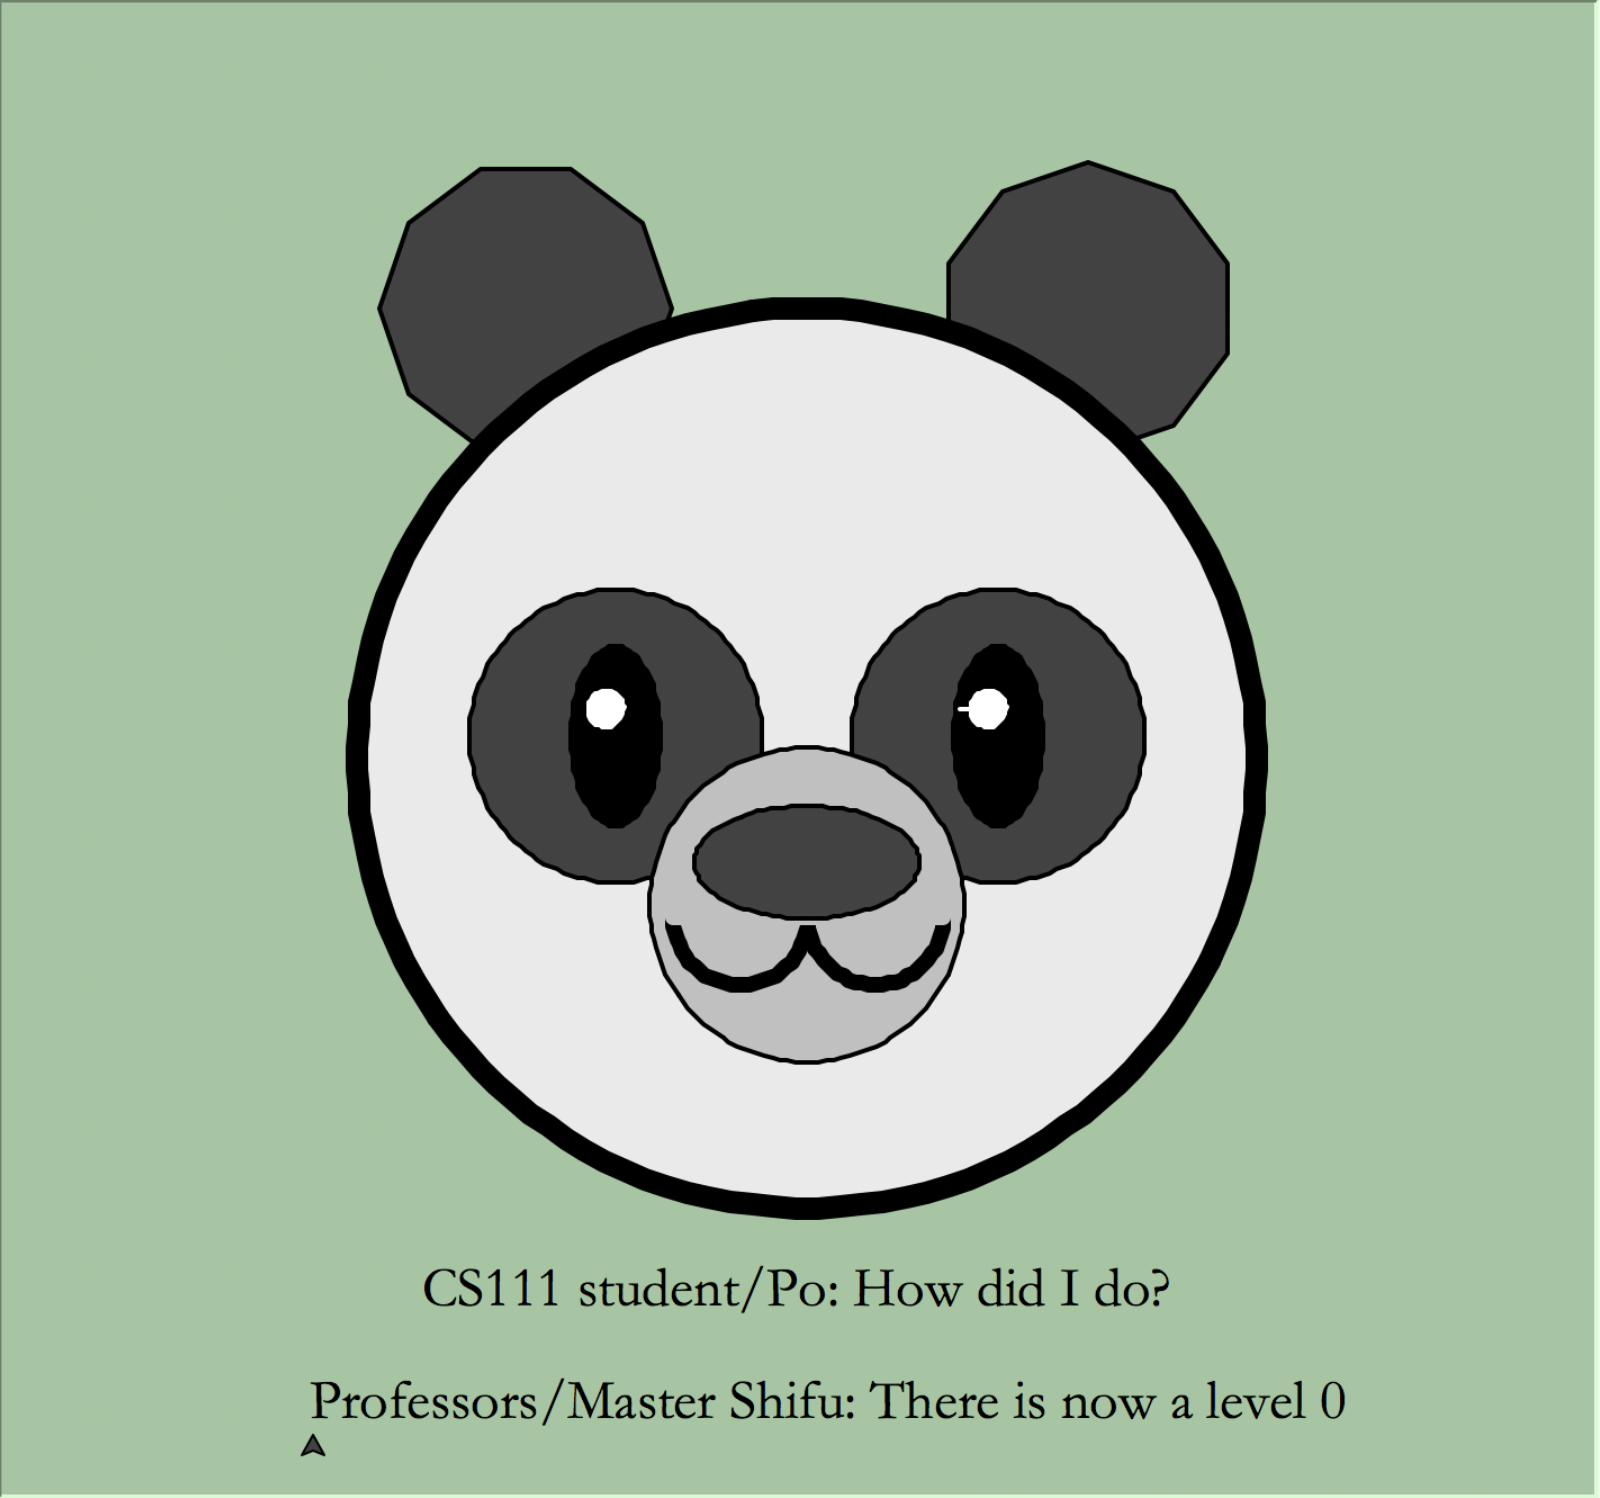 An image of a panda's face by Toshali Goel & Katherine Guo. Text below says: 'CS 111 student/Po: How did I do? ... Professors/Master Shifu: There is now a level 0.'